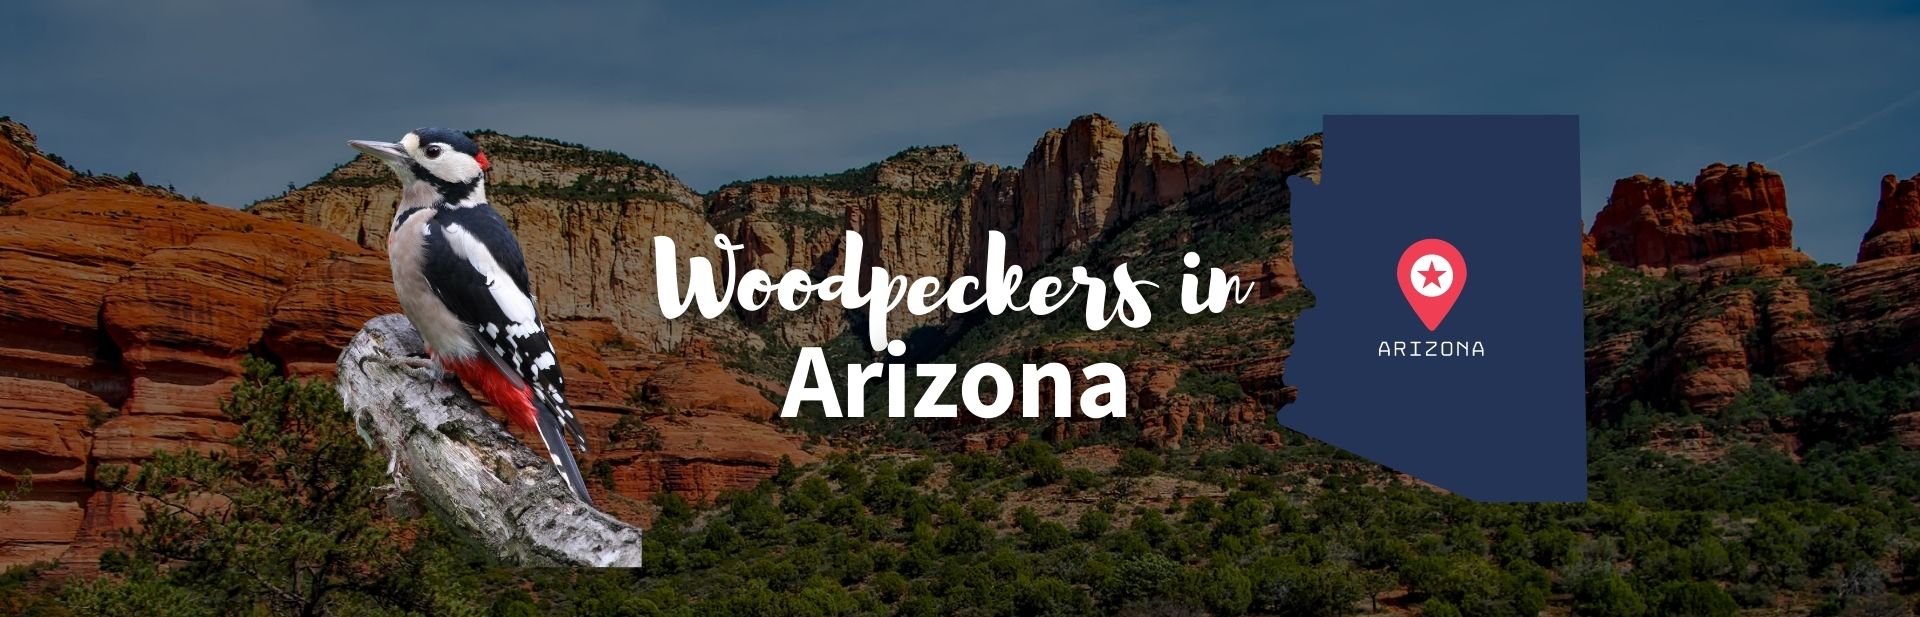 12 Incredible Woodpeckers in Arizona: Identification Guide (Pics and Facts)